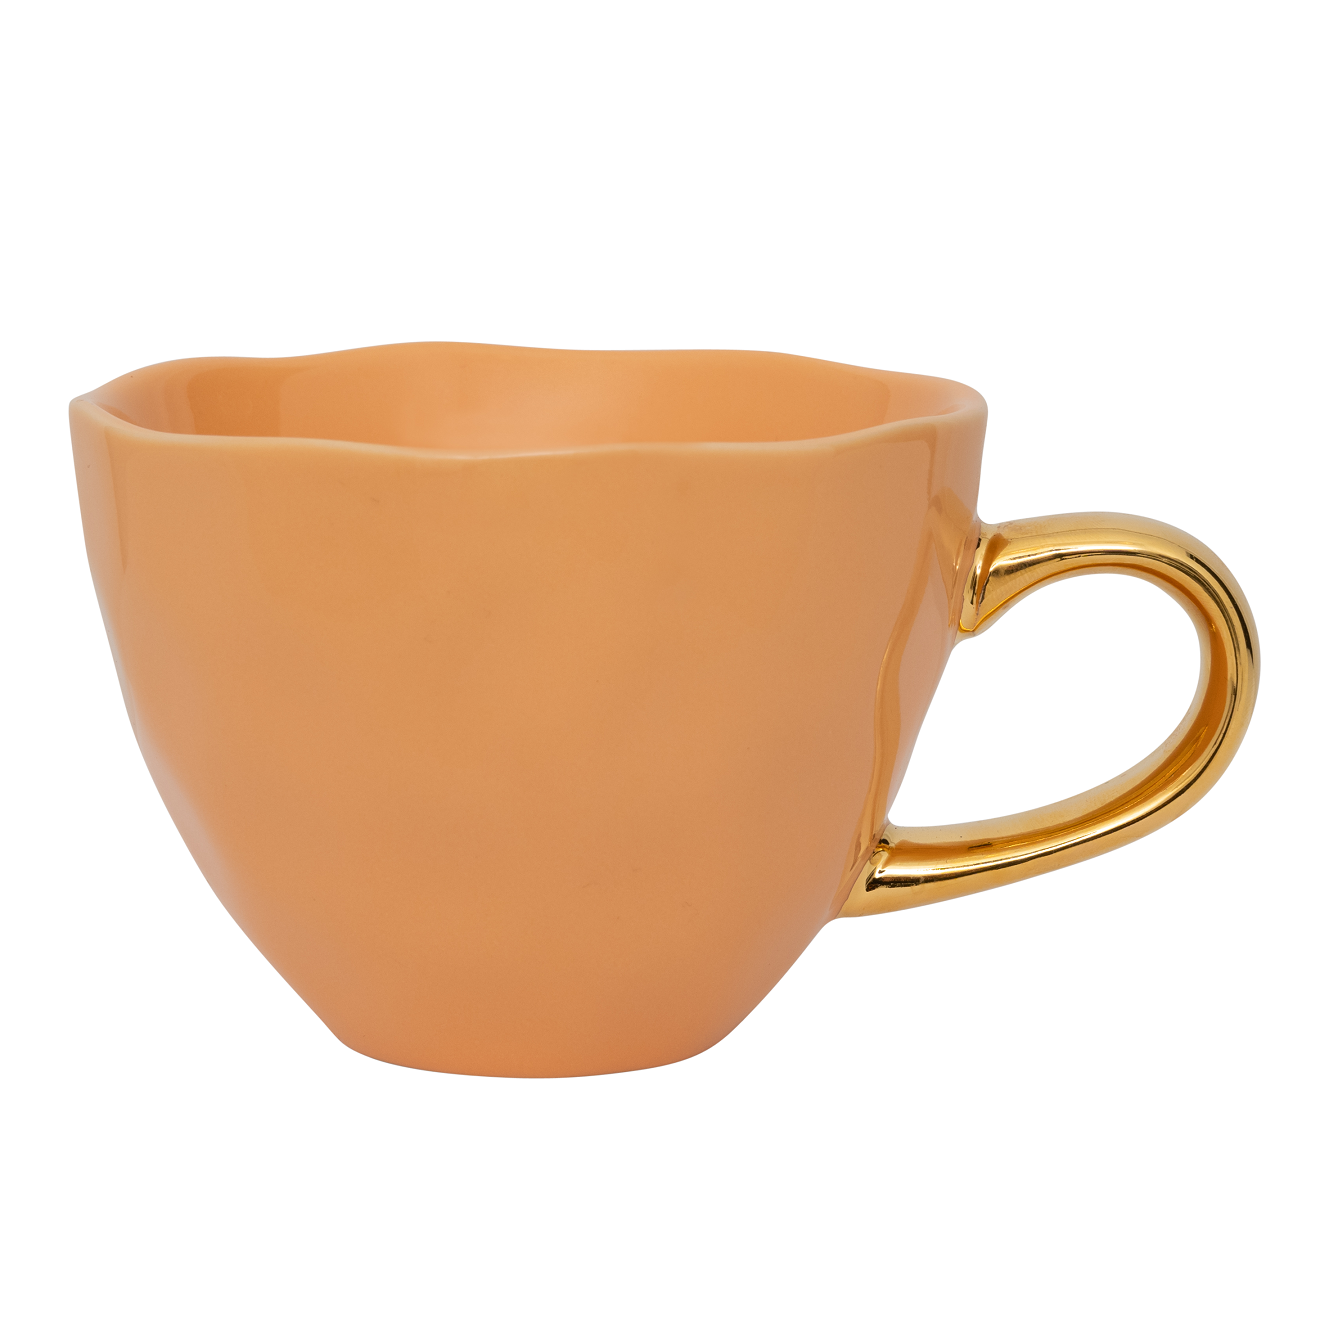 Unc Good Morning Cup Apricot Nectar Gift